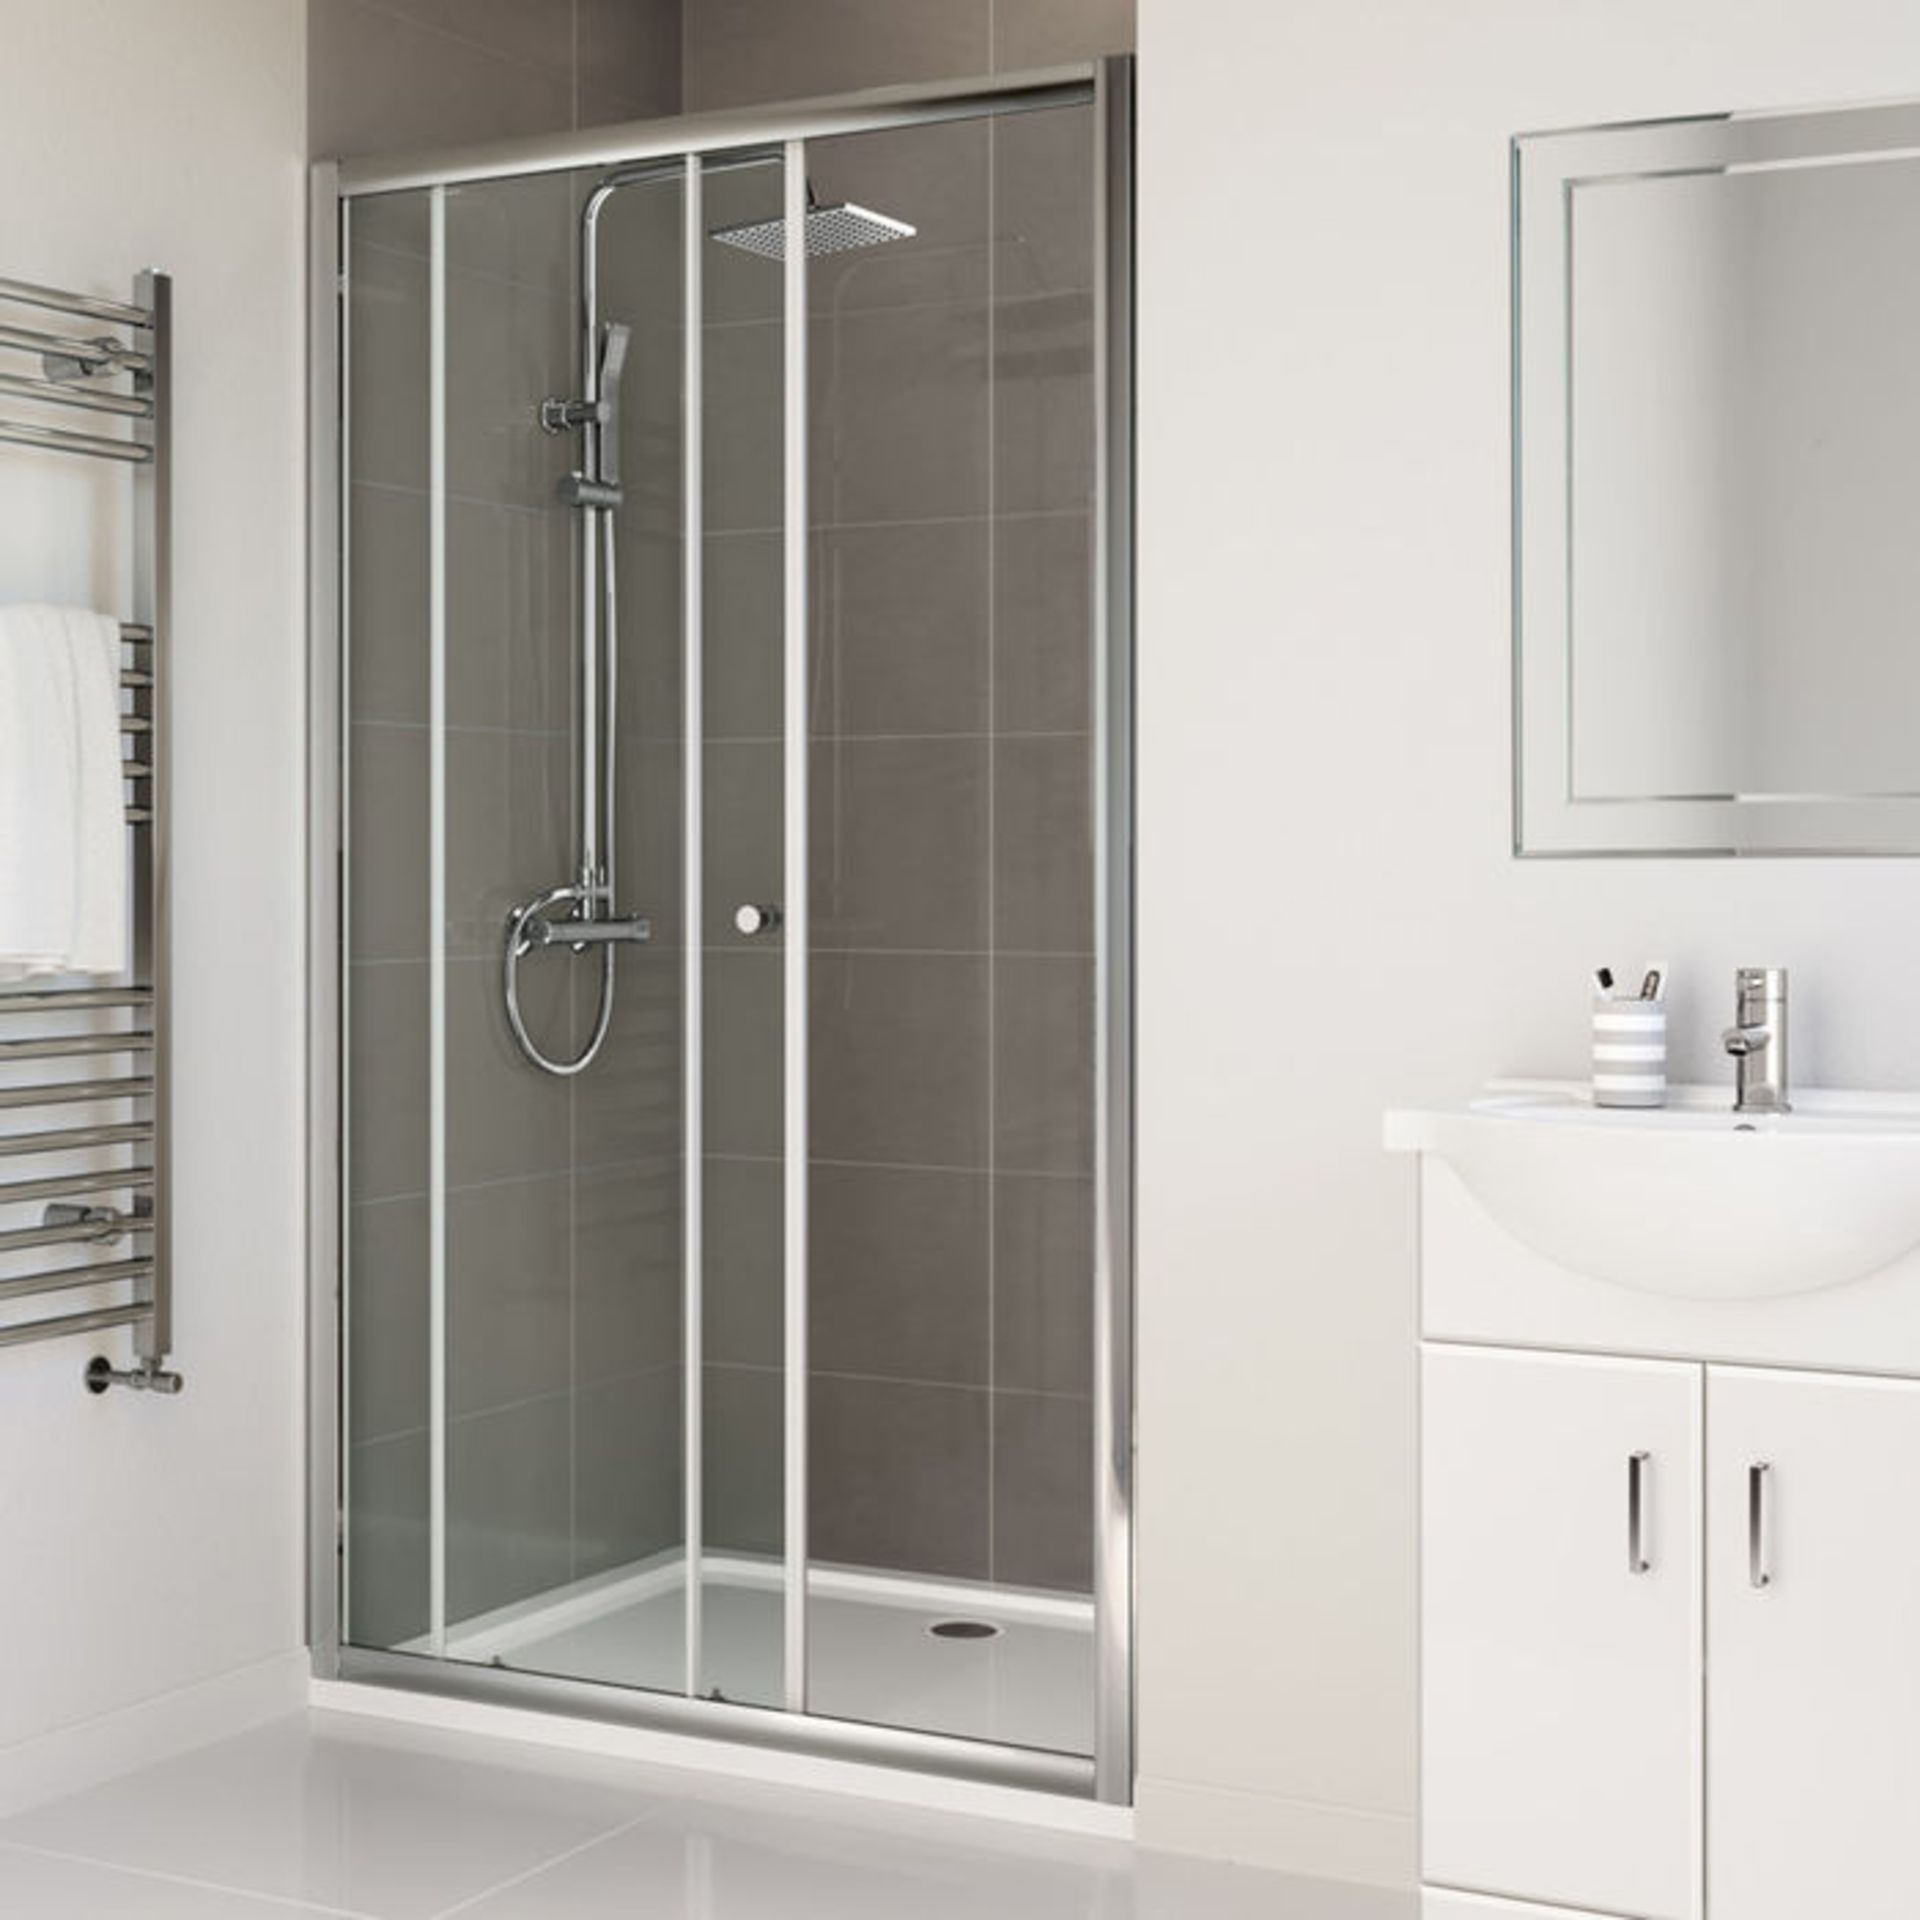 (CS197) 1000mm - Elements Sliding Shower Door. RRP £249.99. 4mm Safety Glass Fully waterproof tested - Image 2 of 5